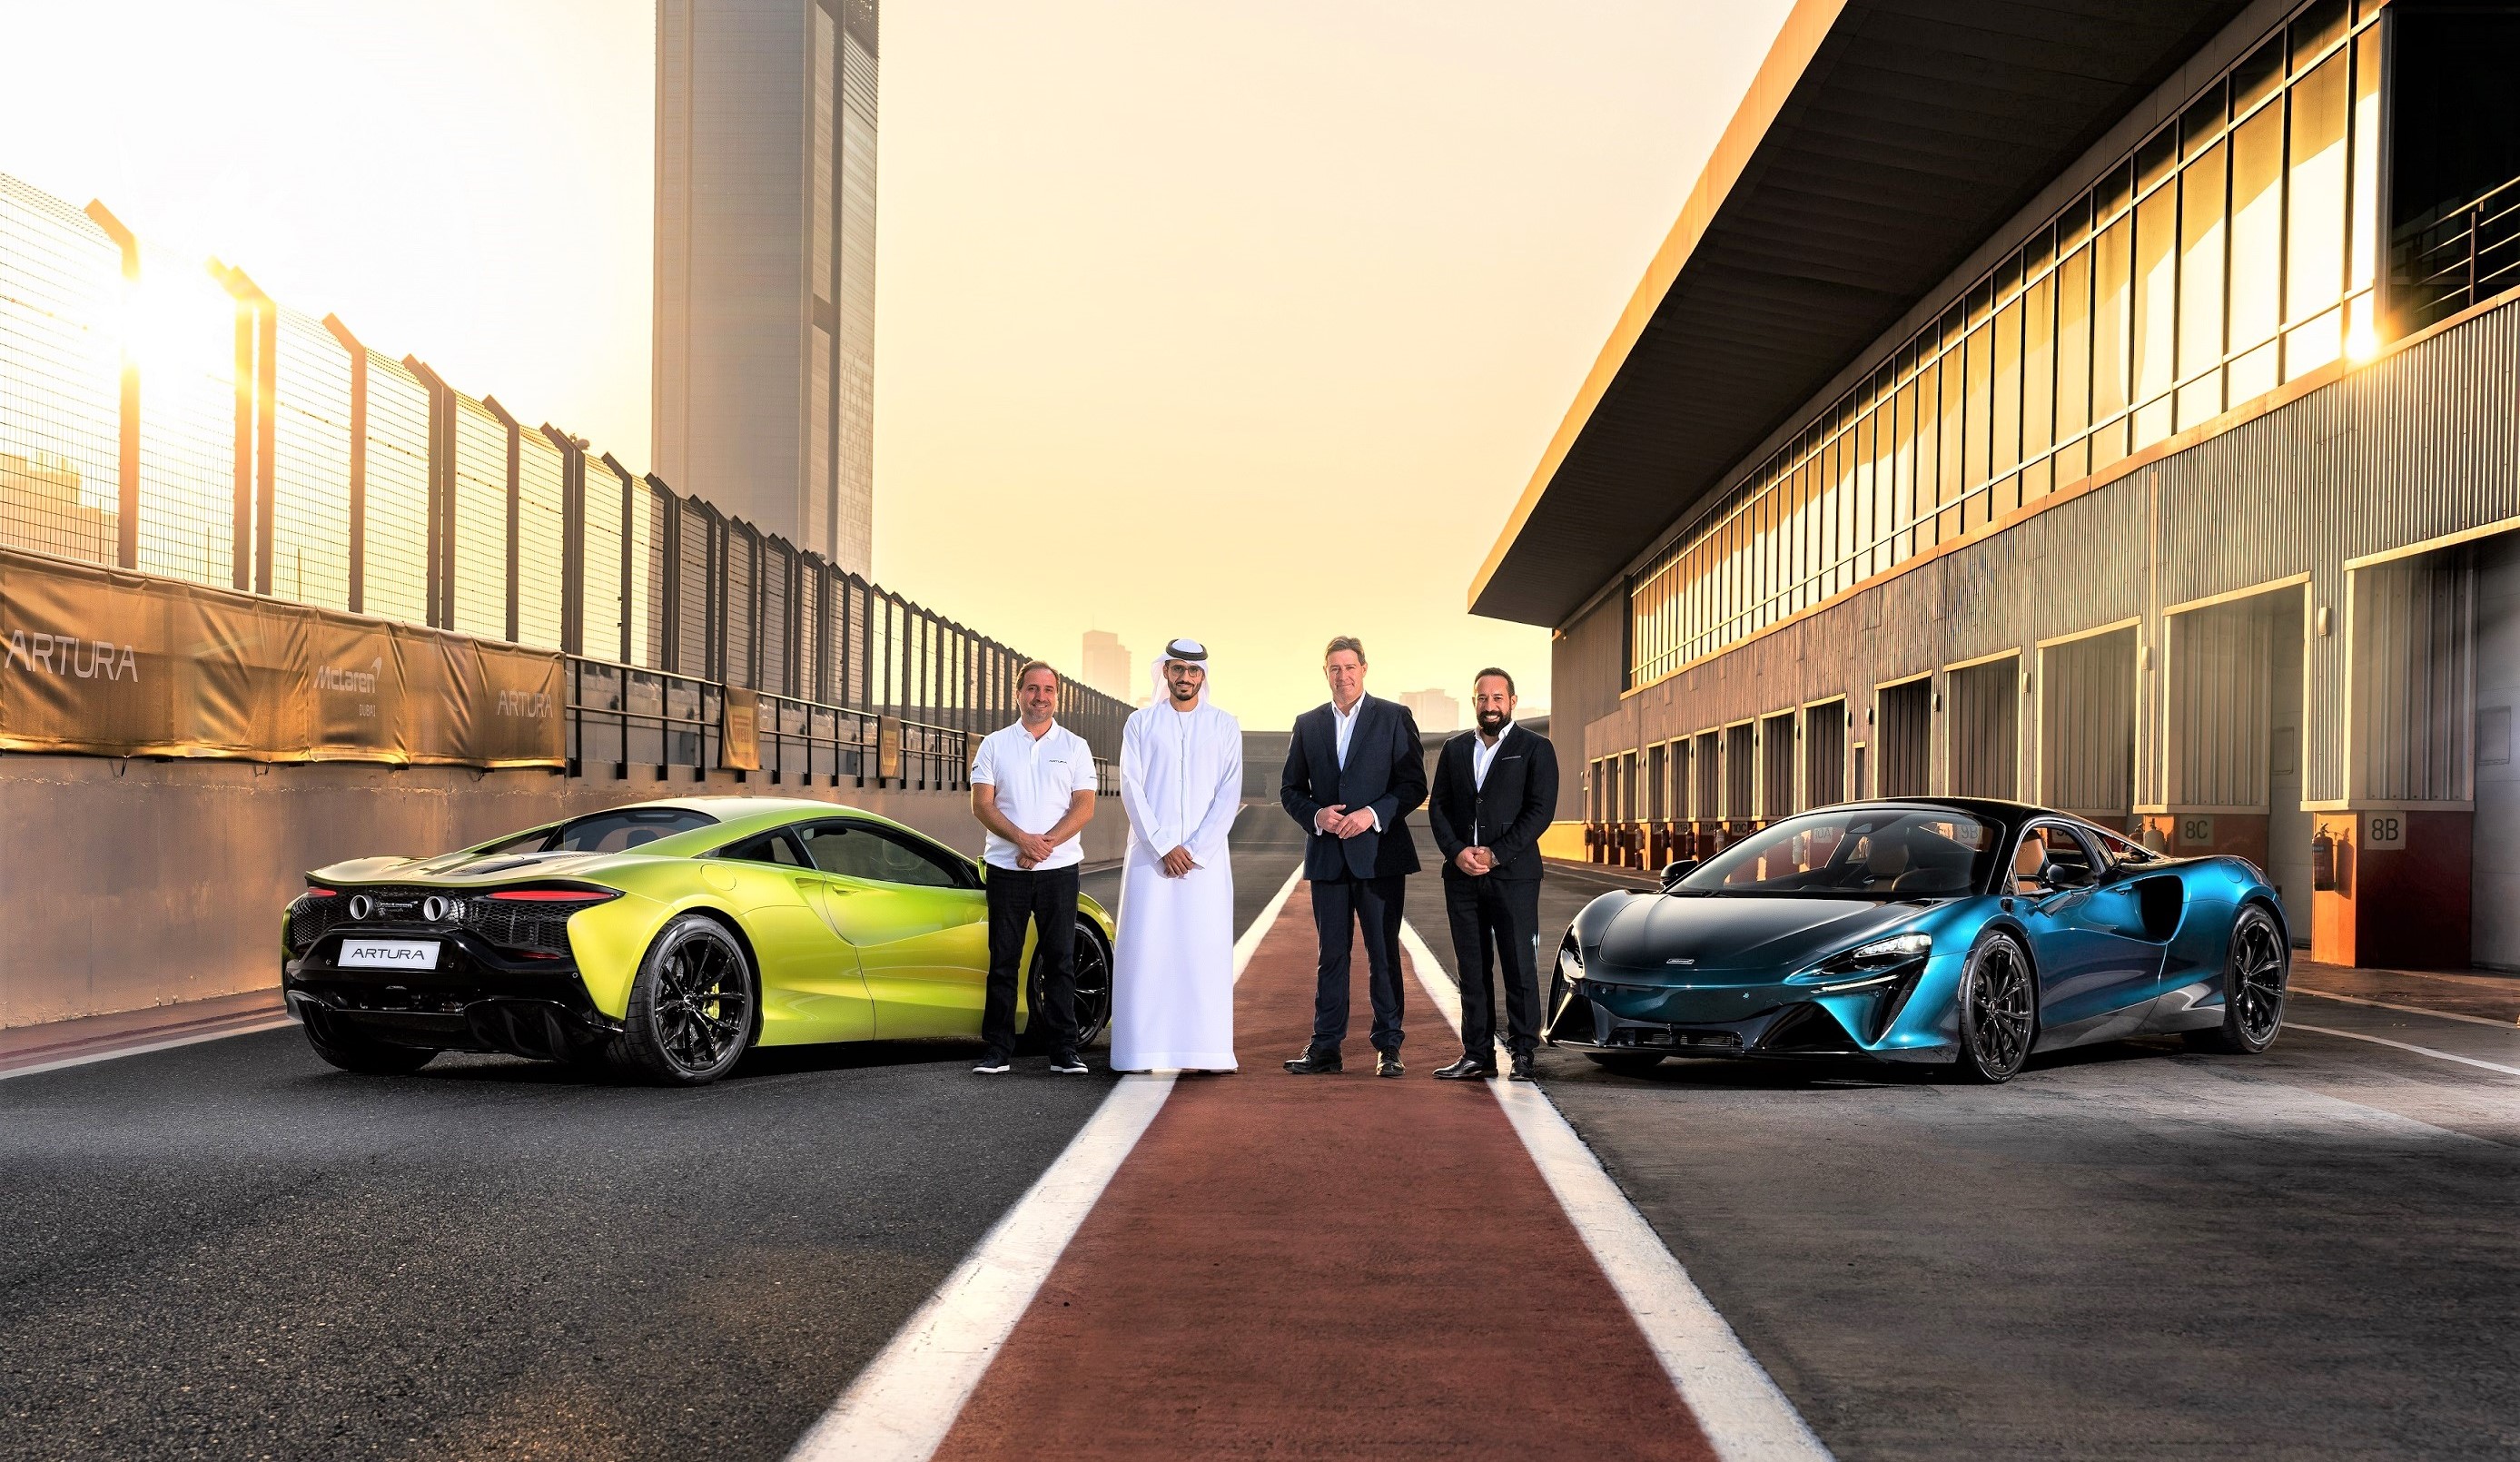 McLaren Automotive celebrates the start of Artura deliveries in the Middle East with an exhilarating track day at the Dubai Autodrome